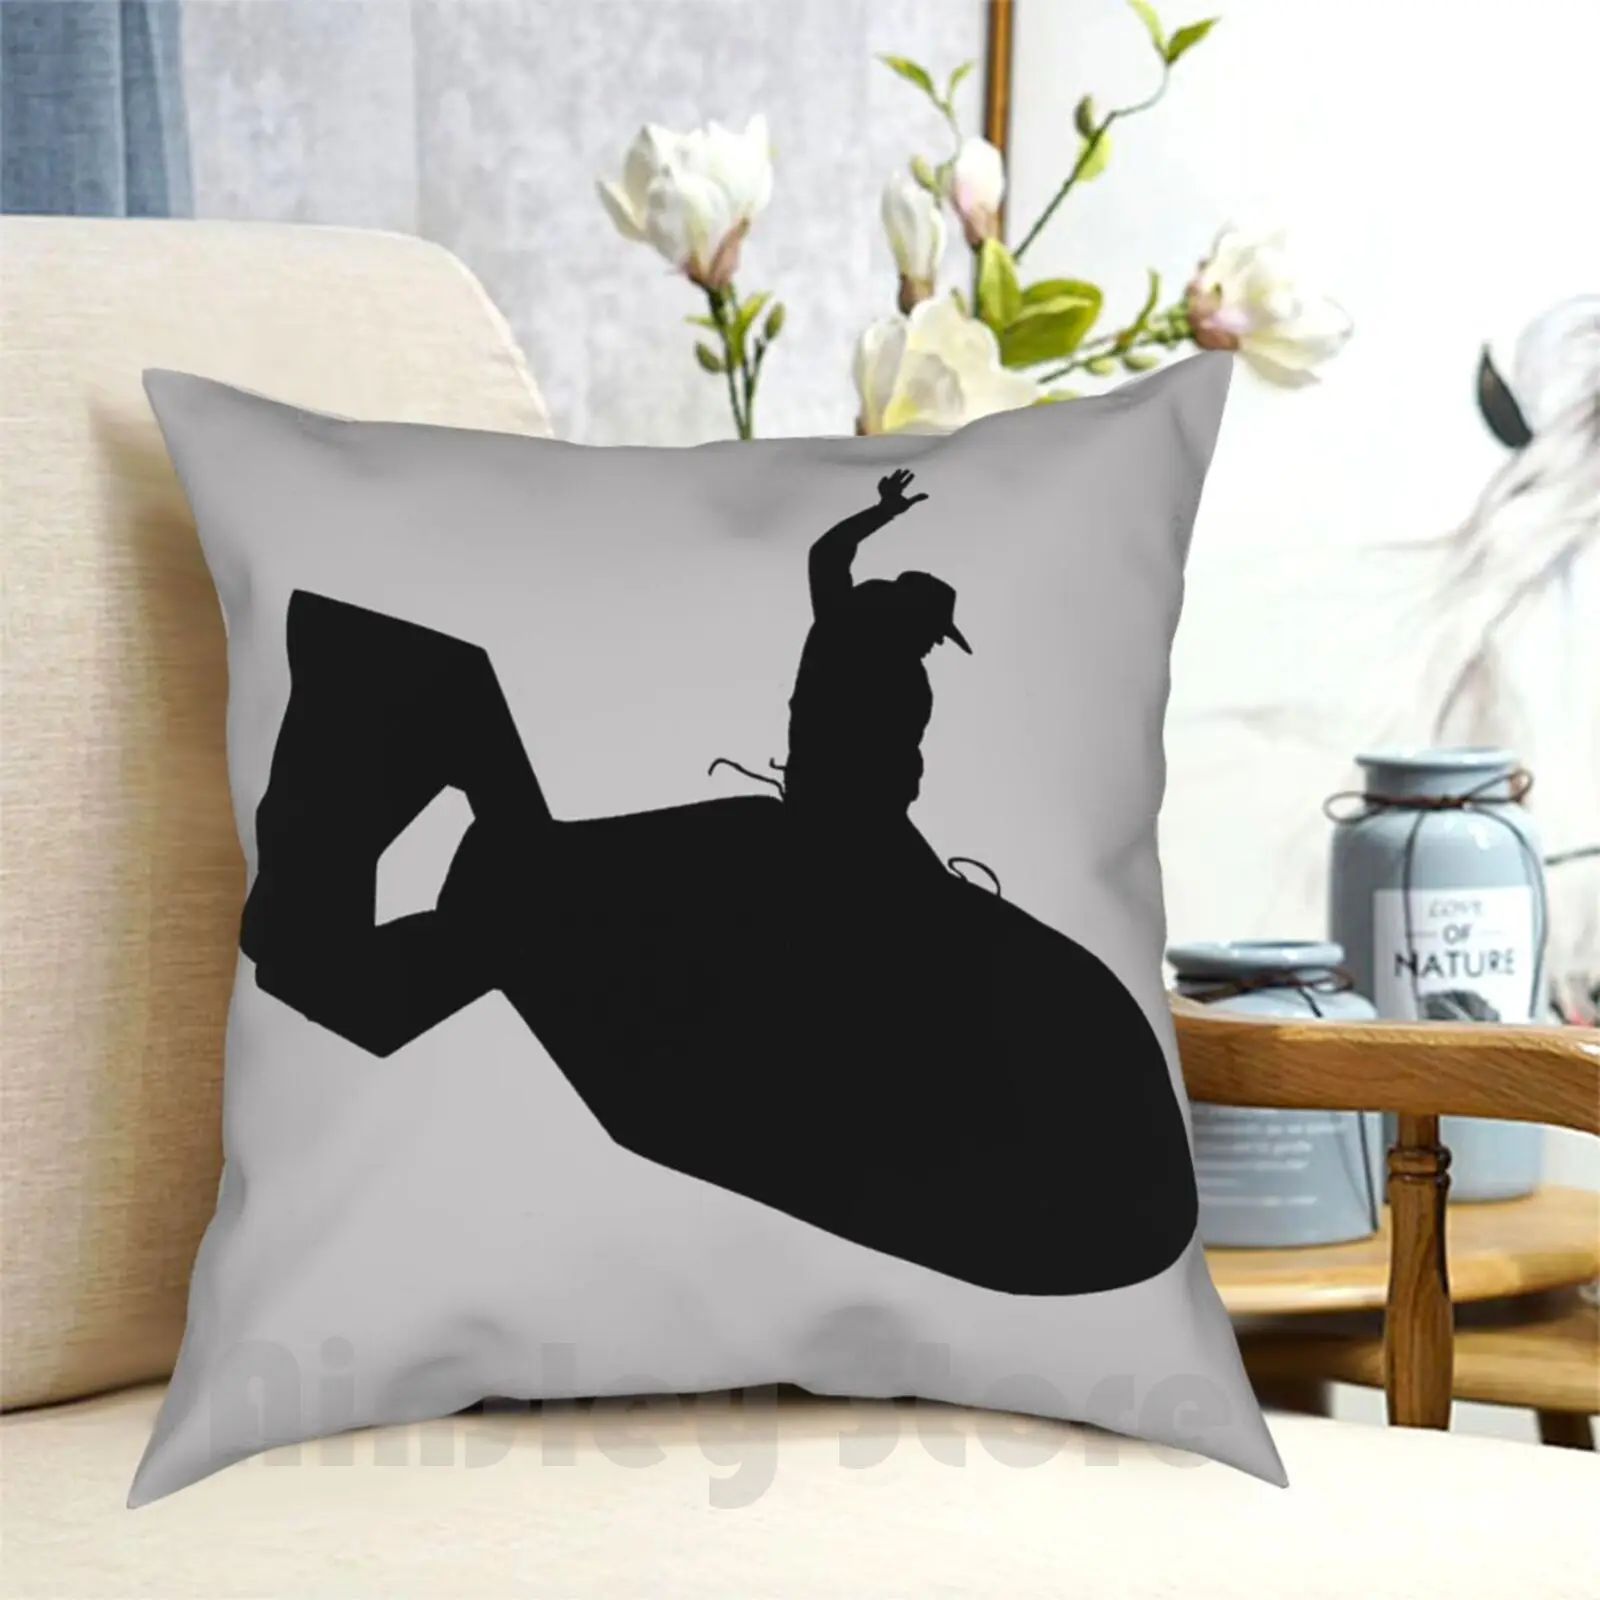 

Bombs Away! Pillow Case Printed Home Soft Throw Pillow Film Movie Reference Movies Films Dr Strangelove Strangelove